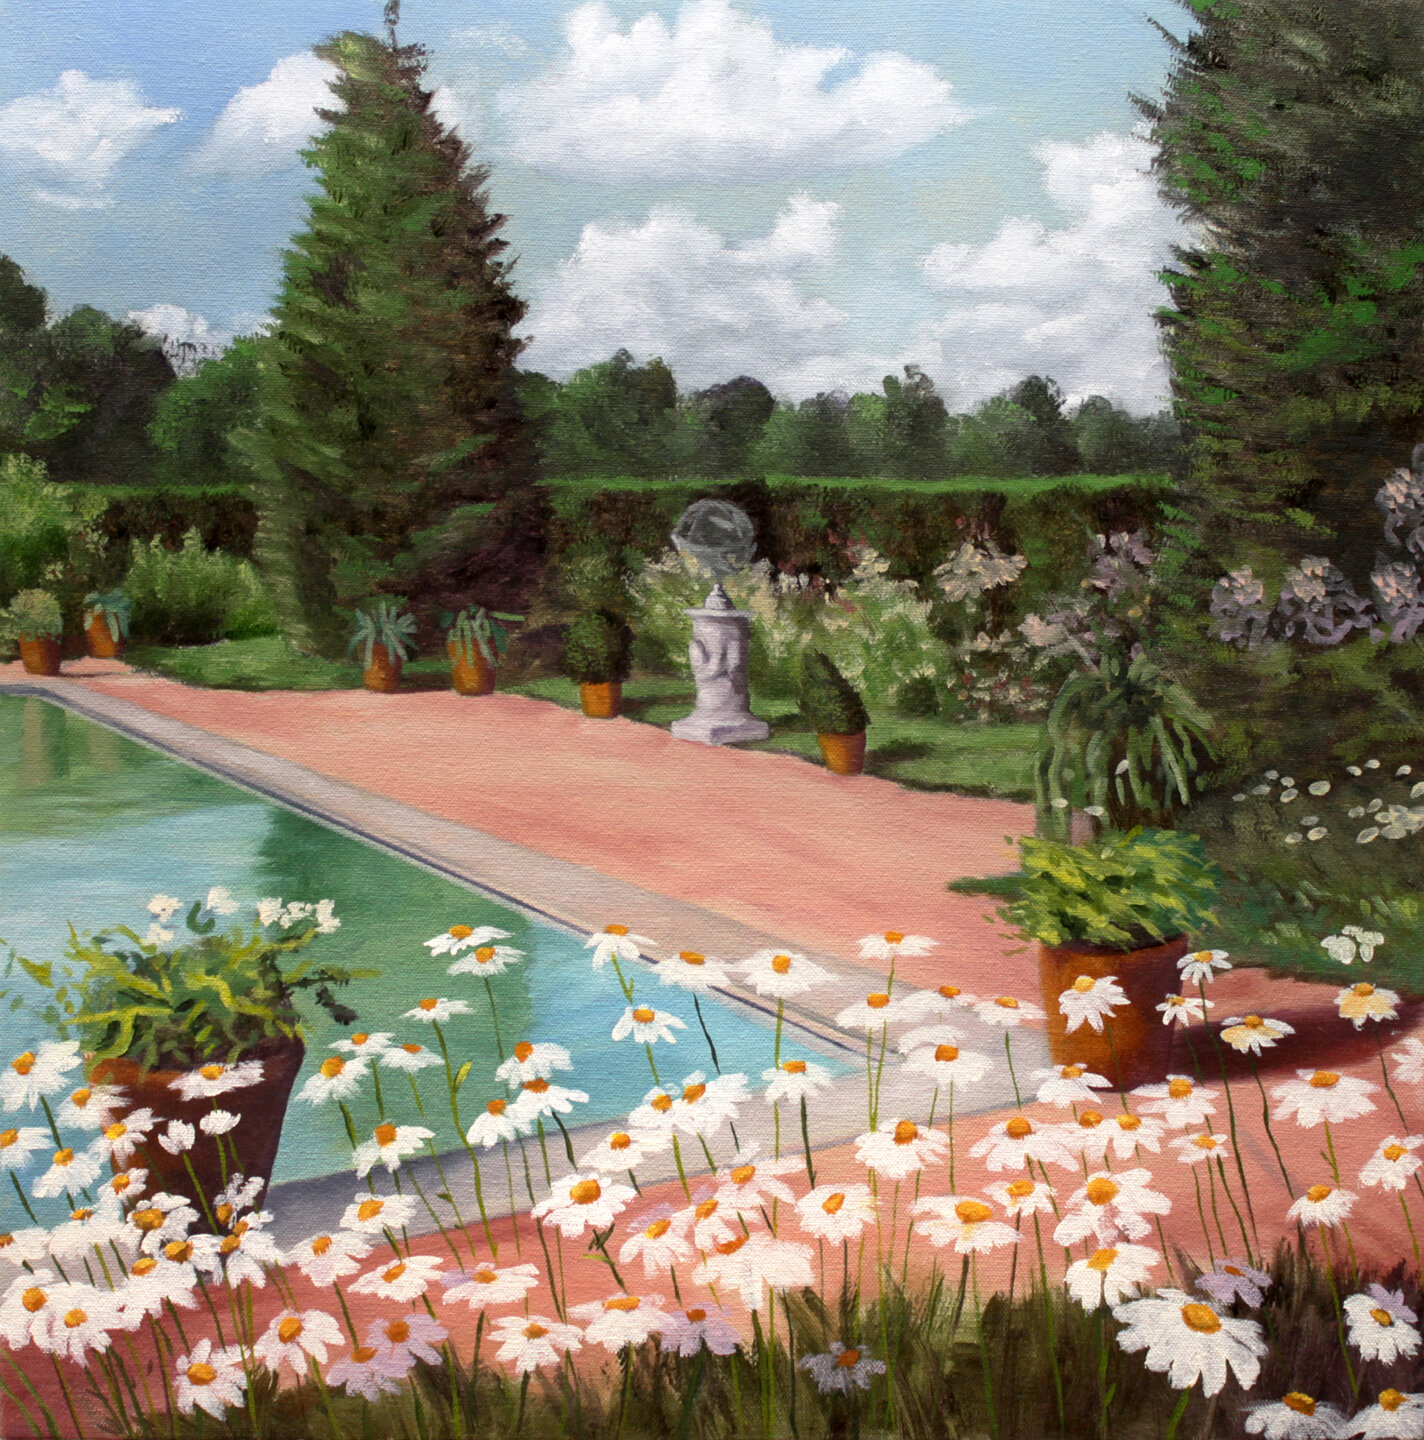  The Garden 2019 oil on canvas 20 x 20 in. 